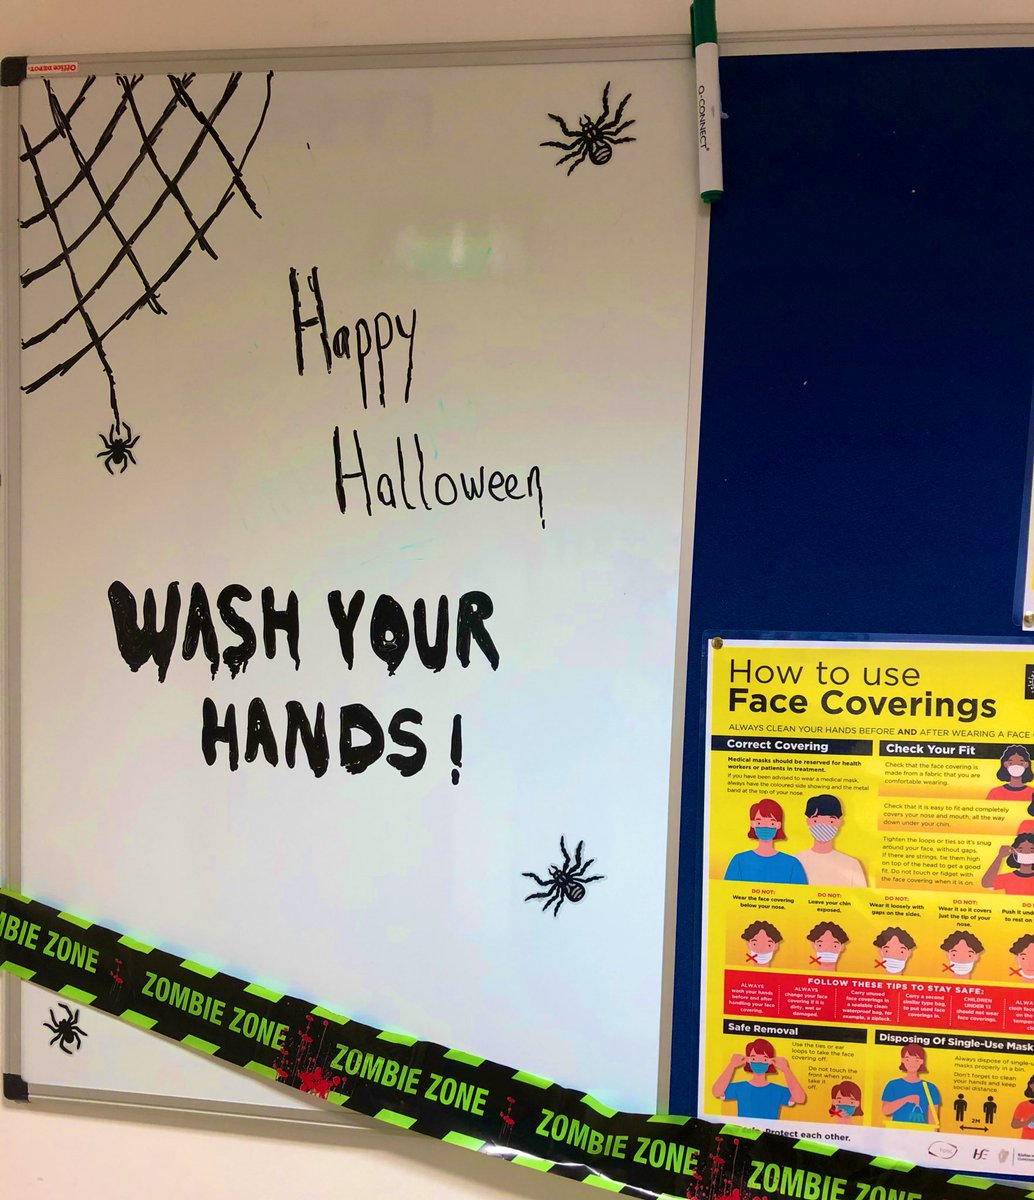 The start of some decorations and spooky messaging here in West Kildare community team @LinnDara 🎃👻 #teamlinndara #staysafe